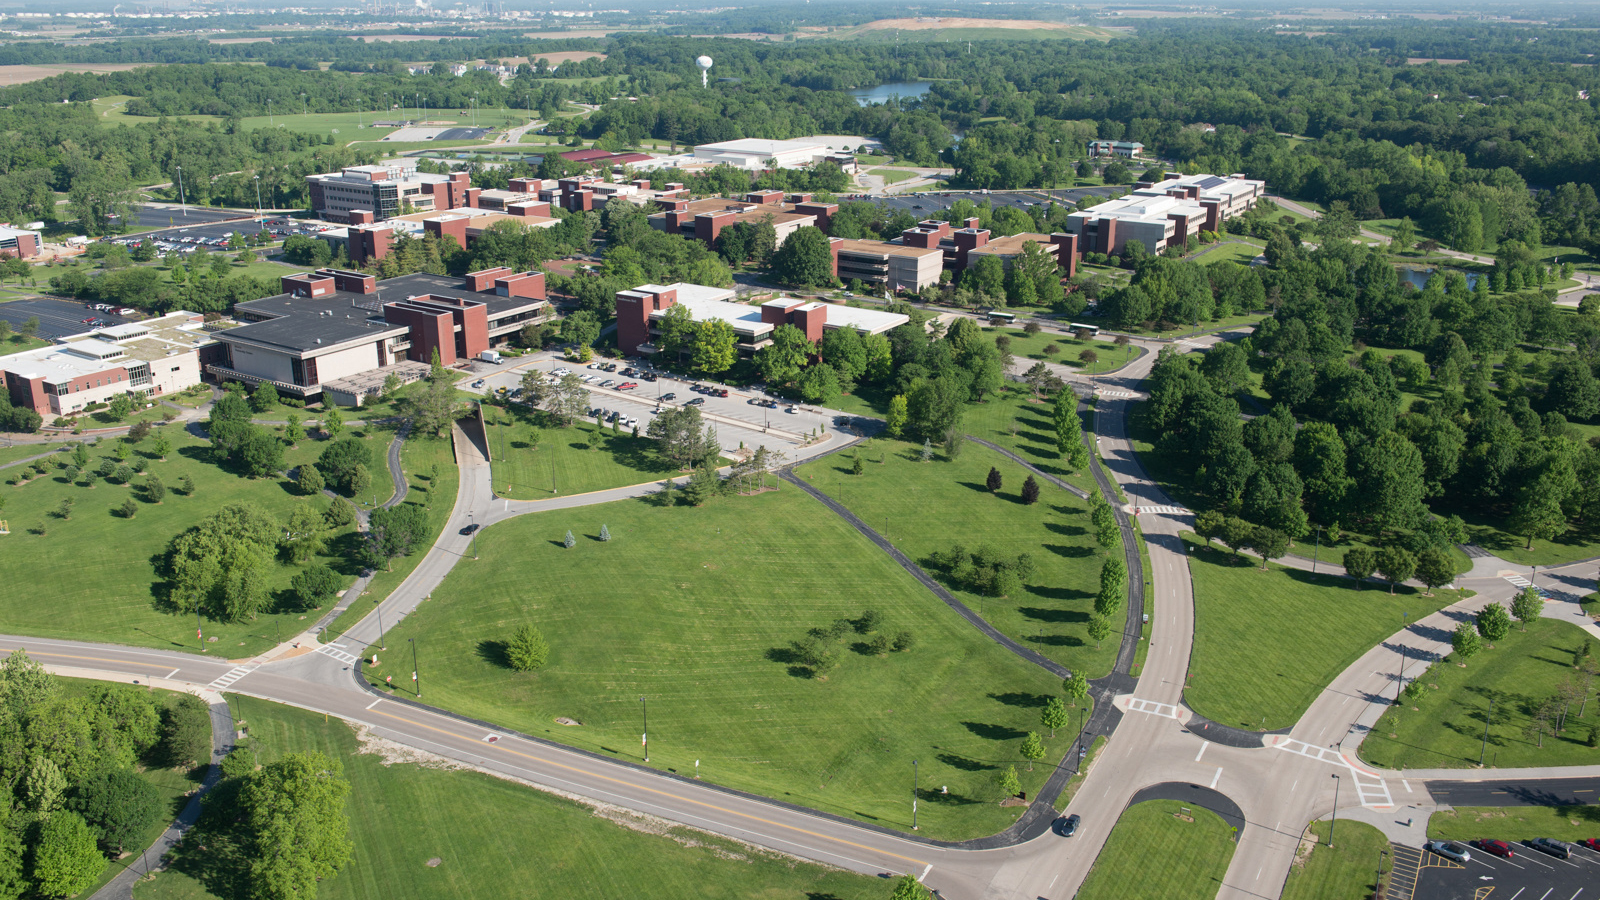 Ariel view of the SIUE campus.